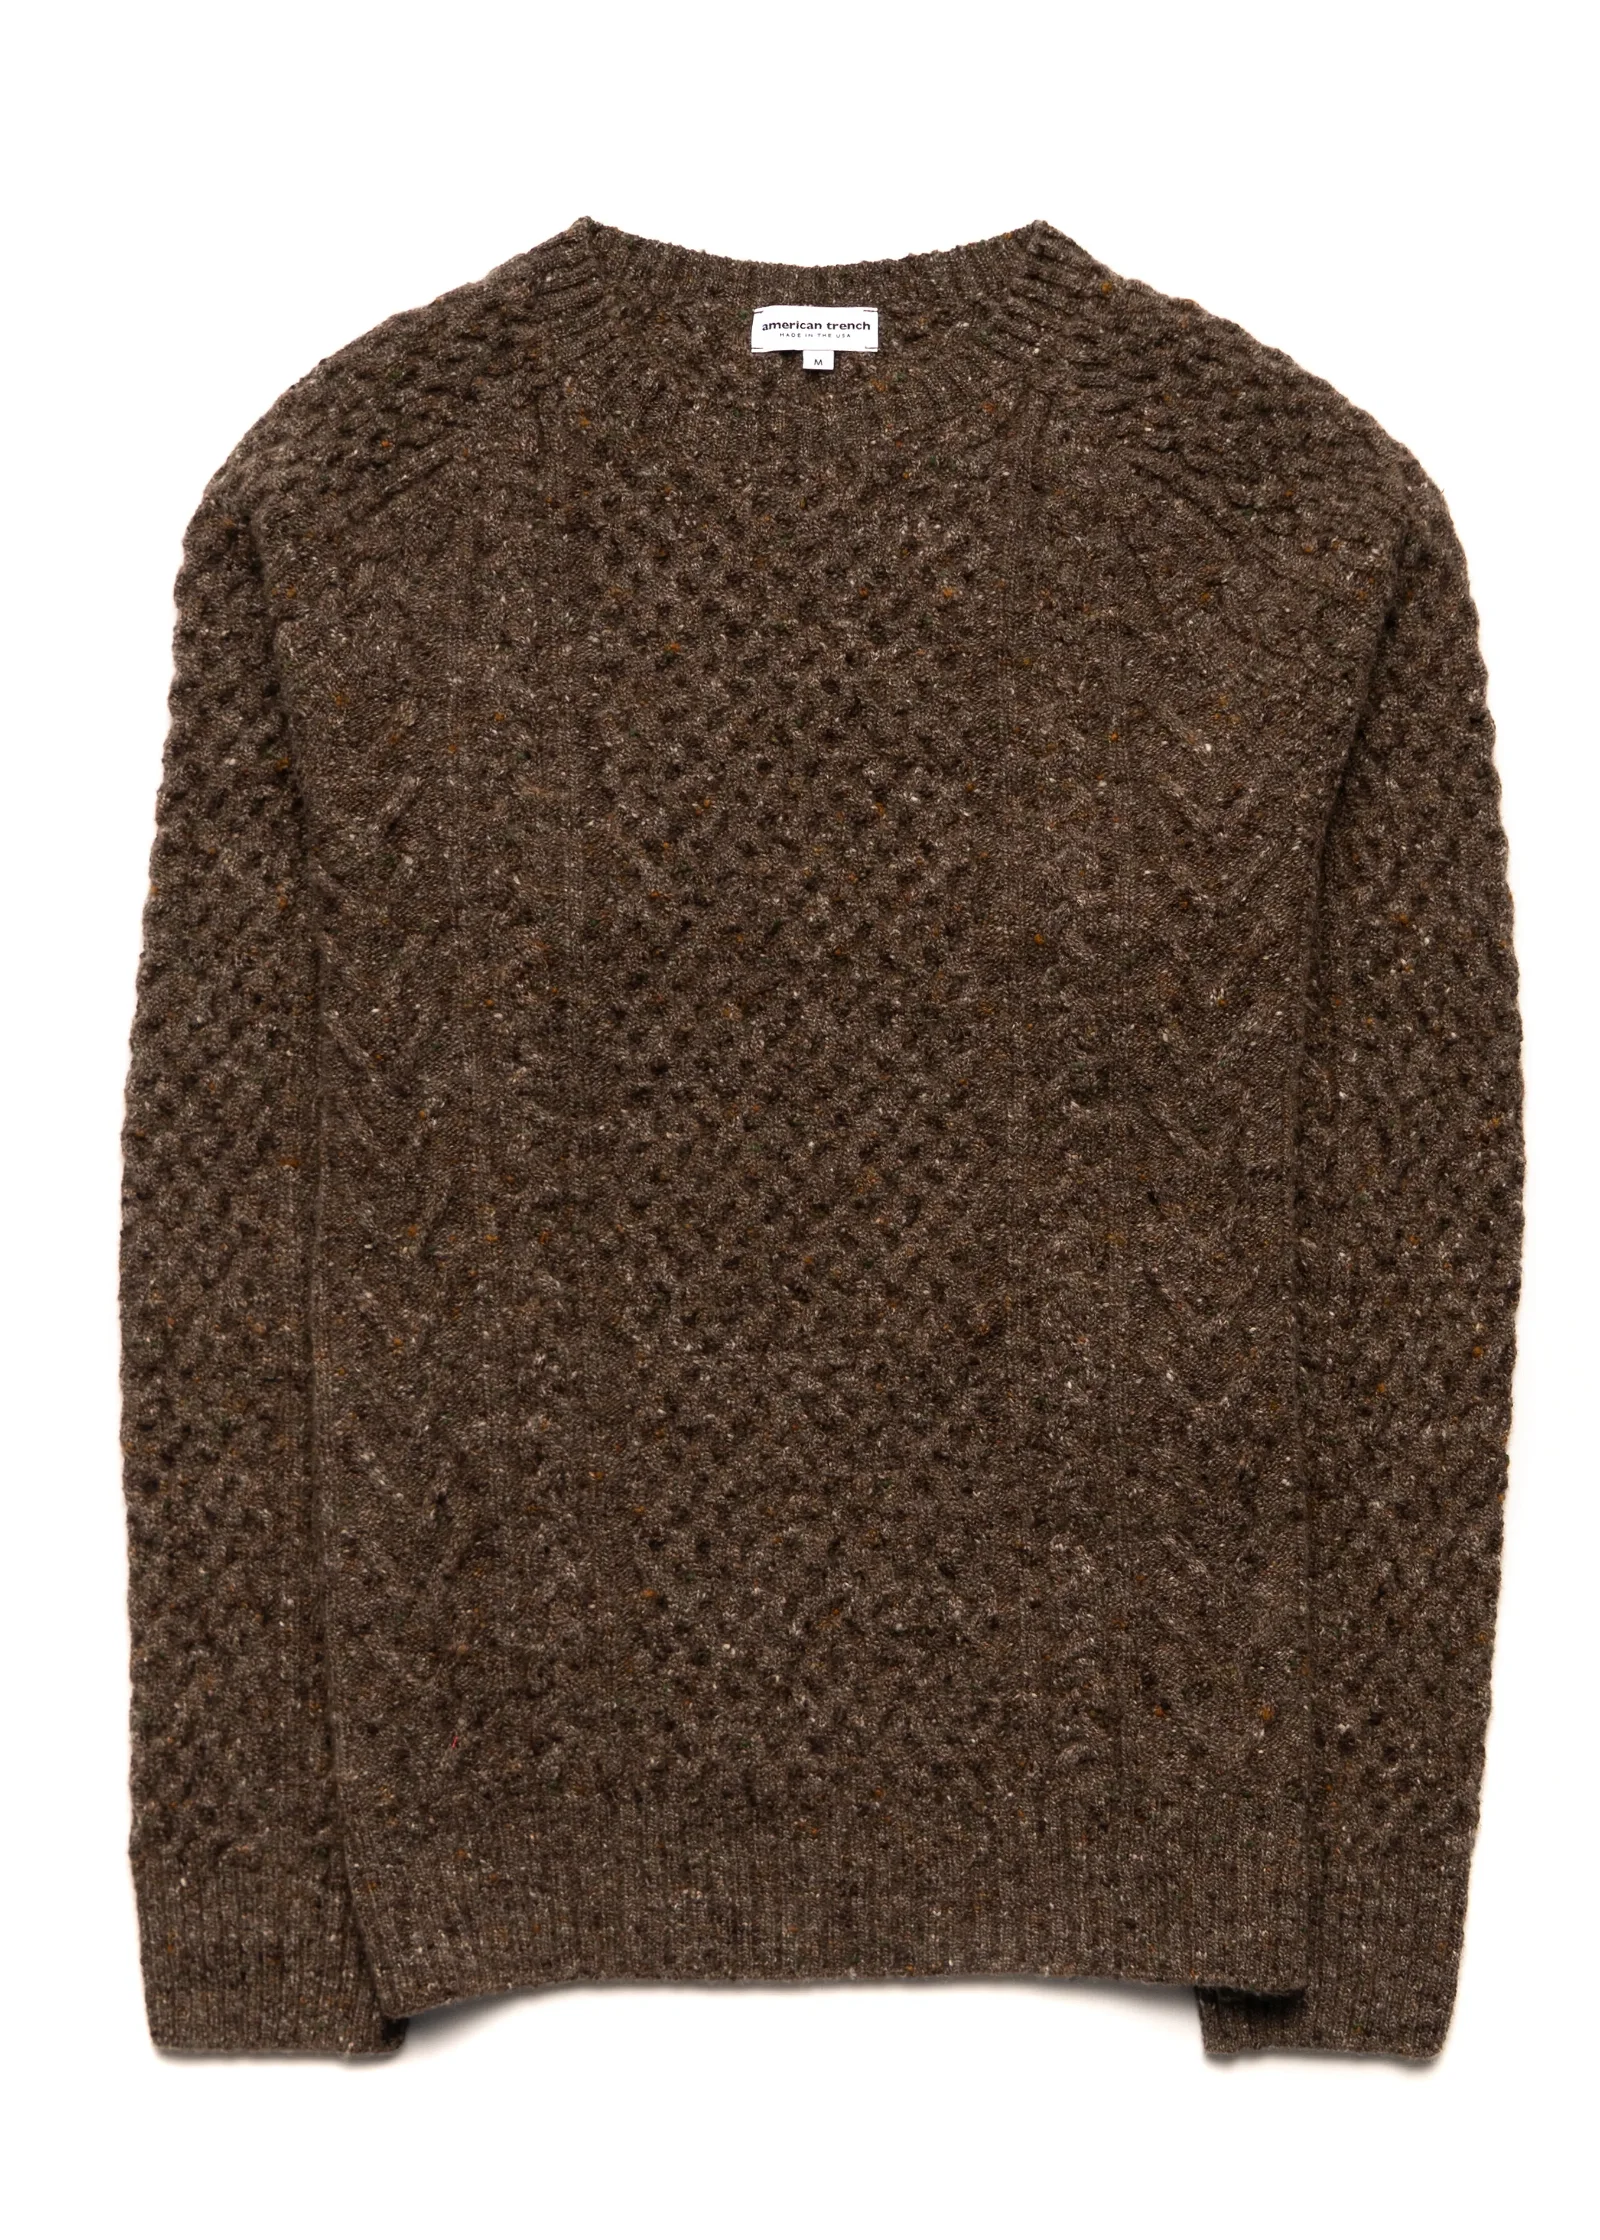 Image of Donegal Fisherman Sweater